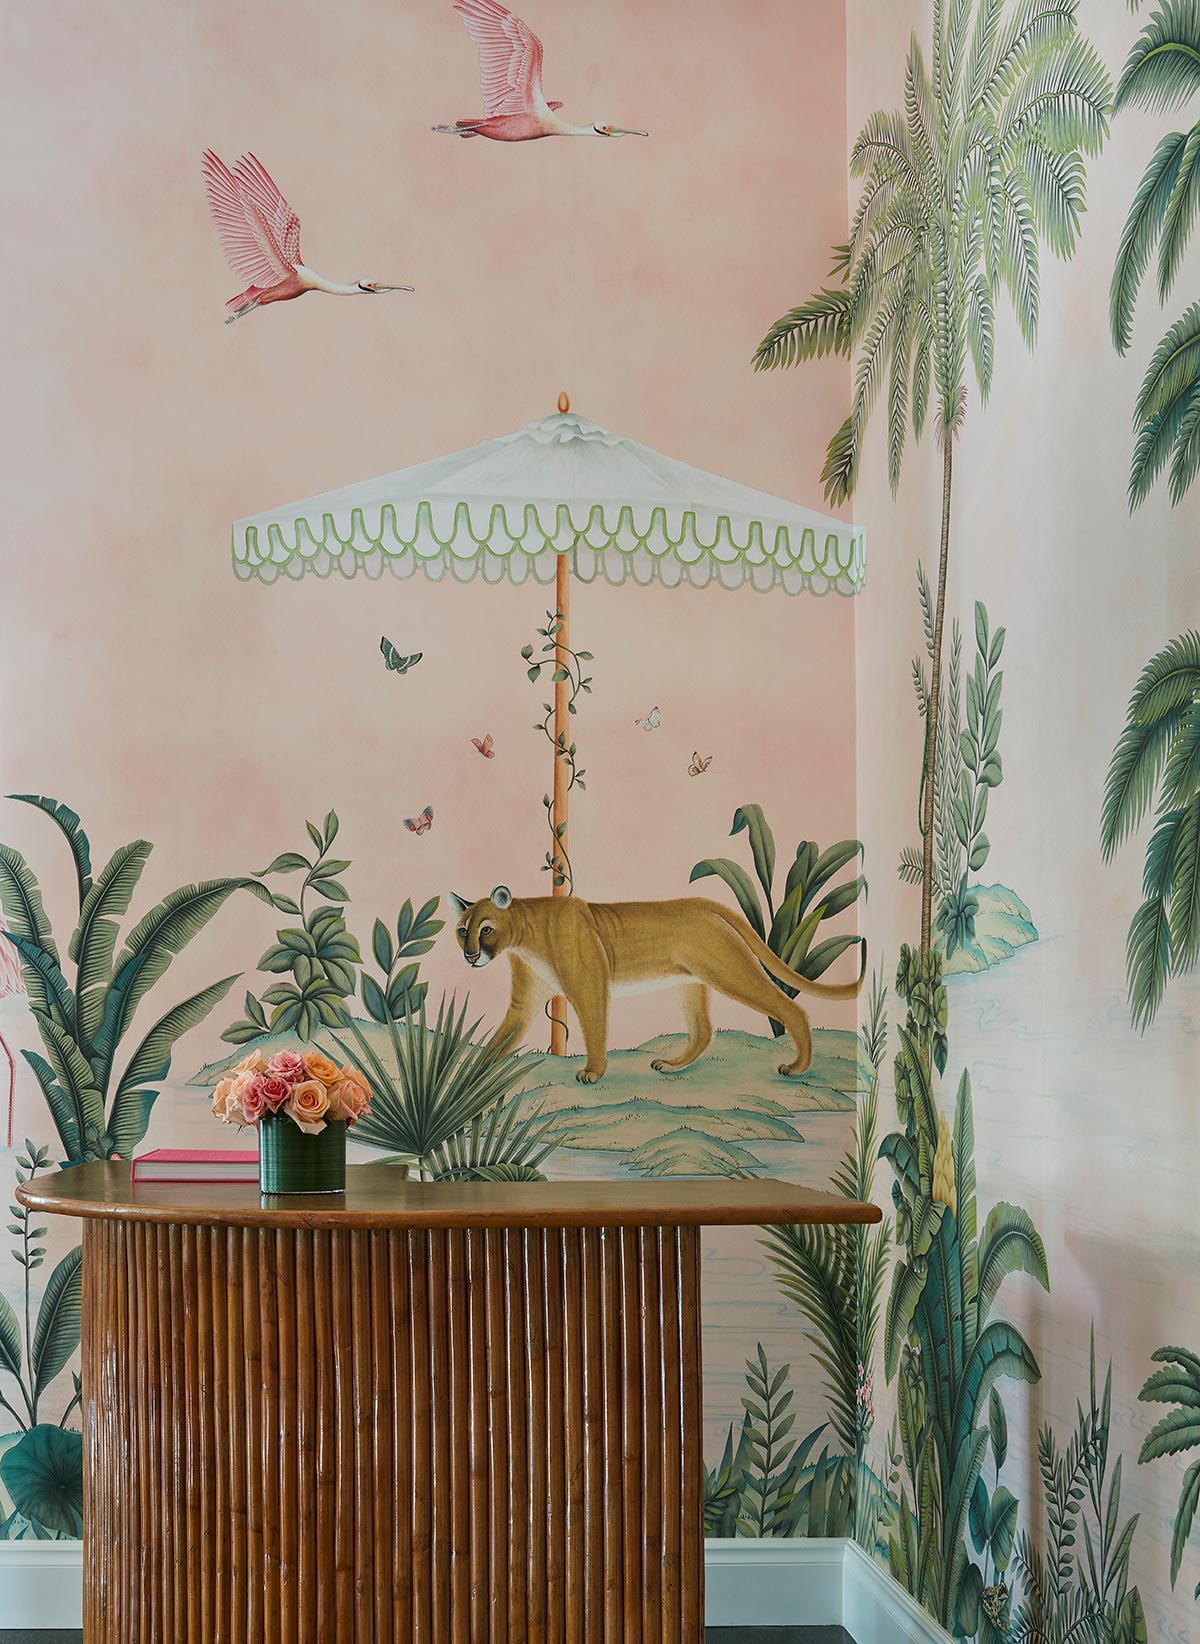 In Design | Decor Inspiration: de Gournay at the Colony Hotel, Palm Beach